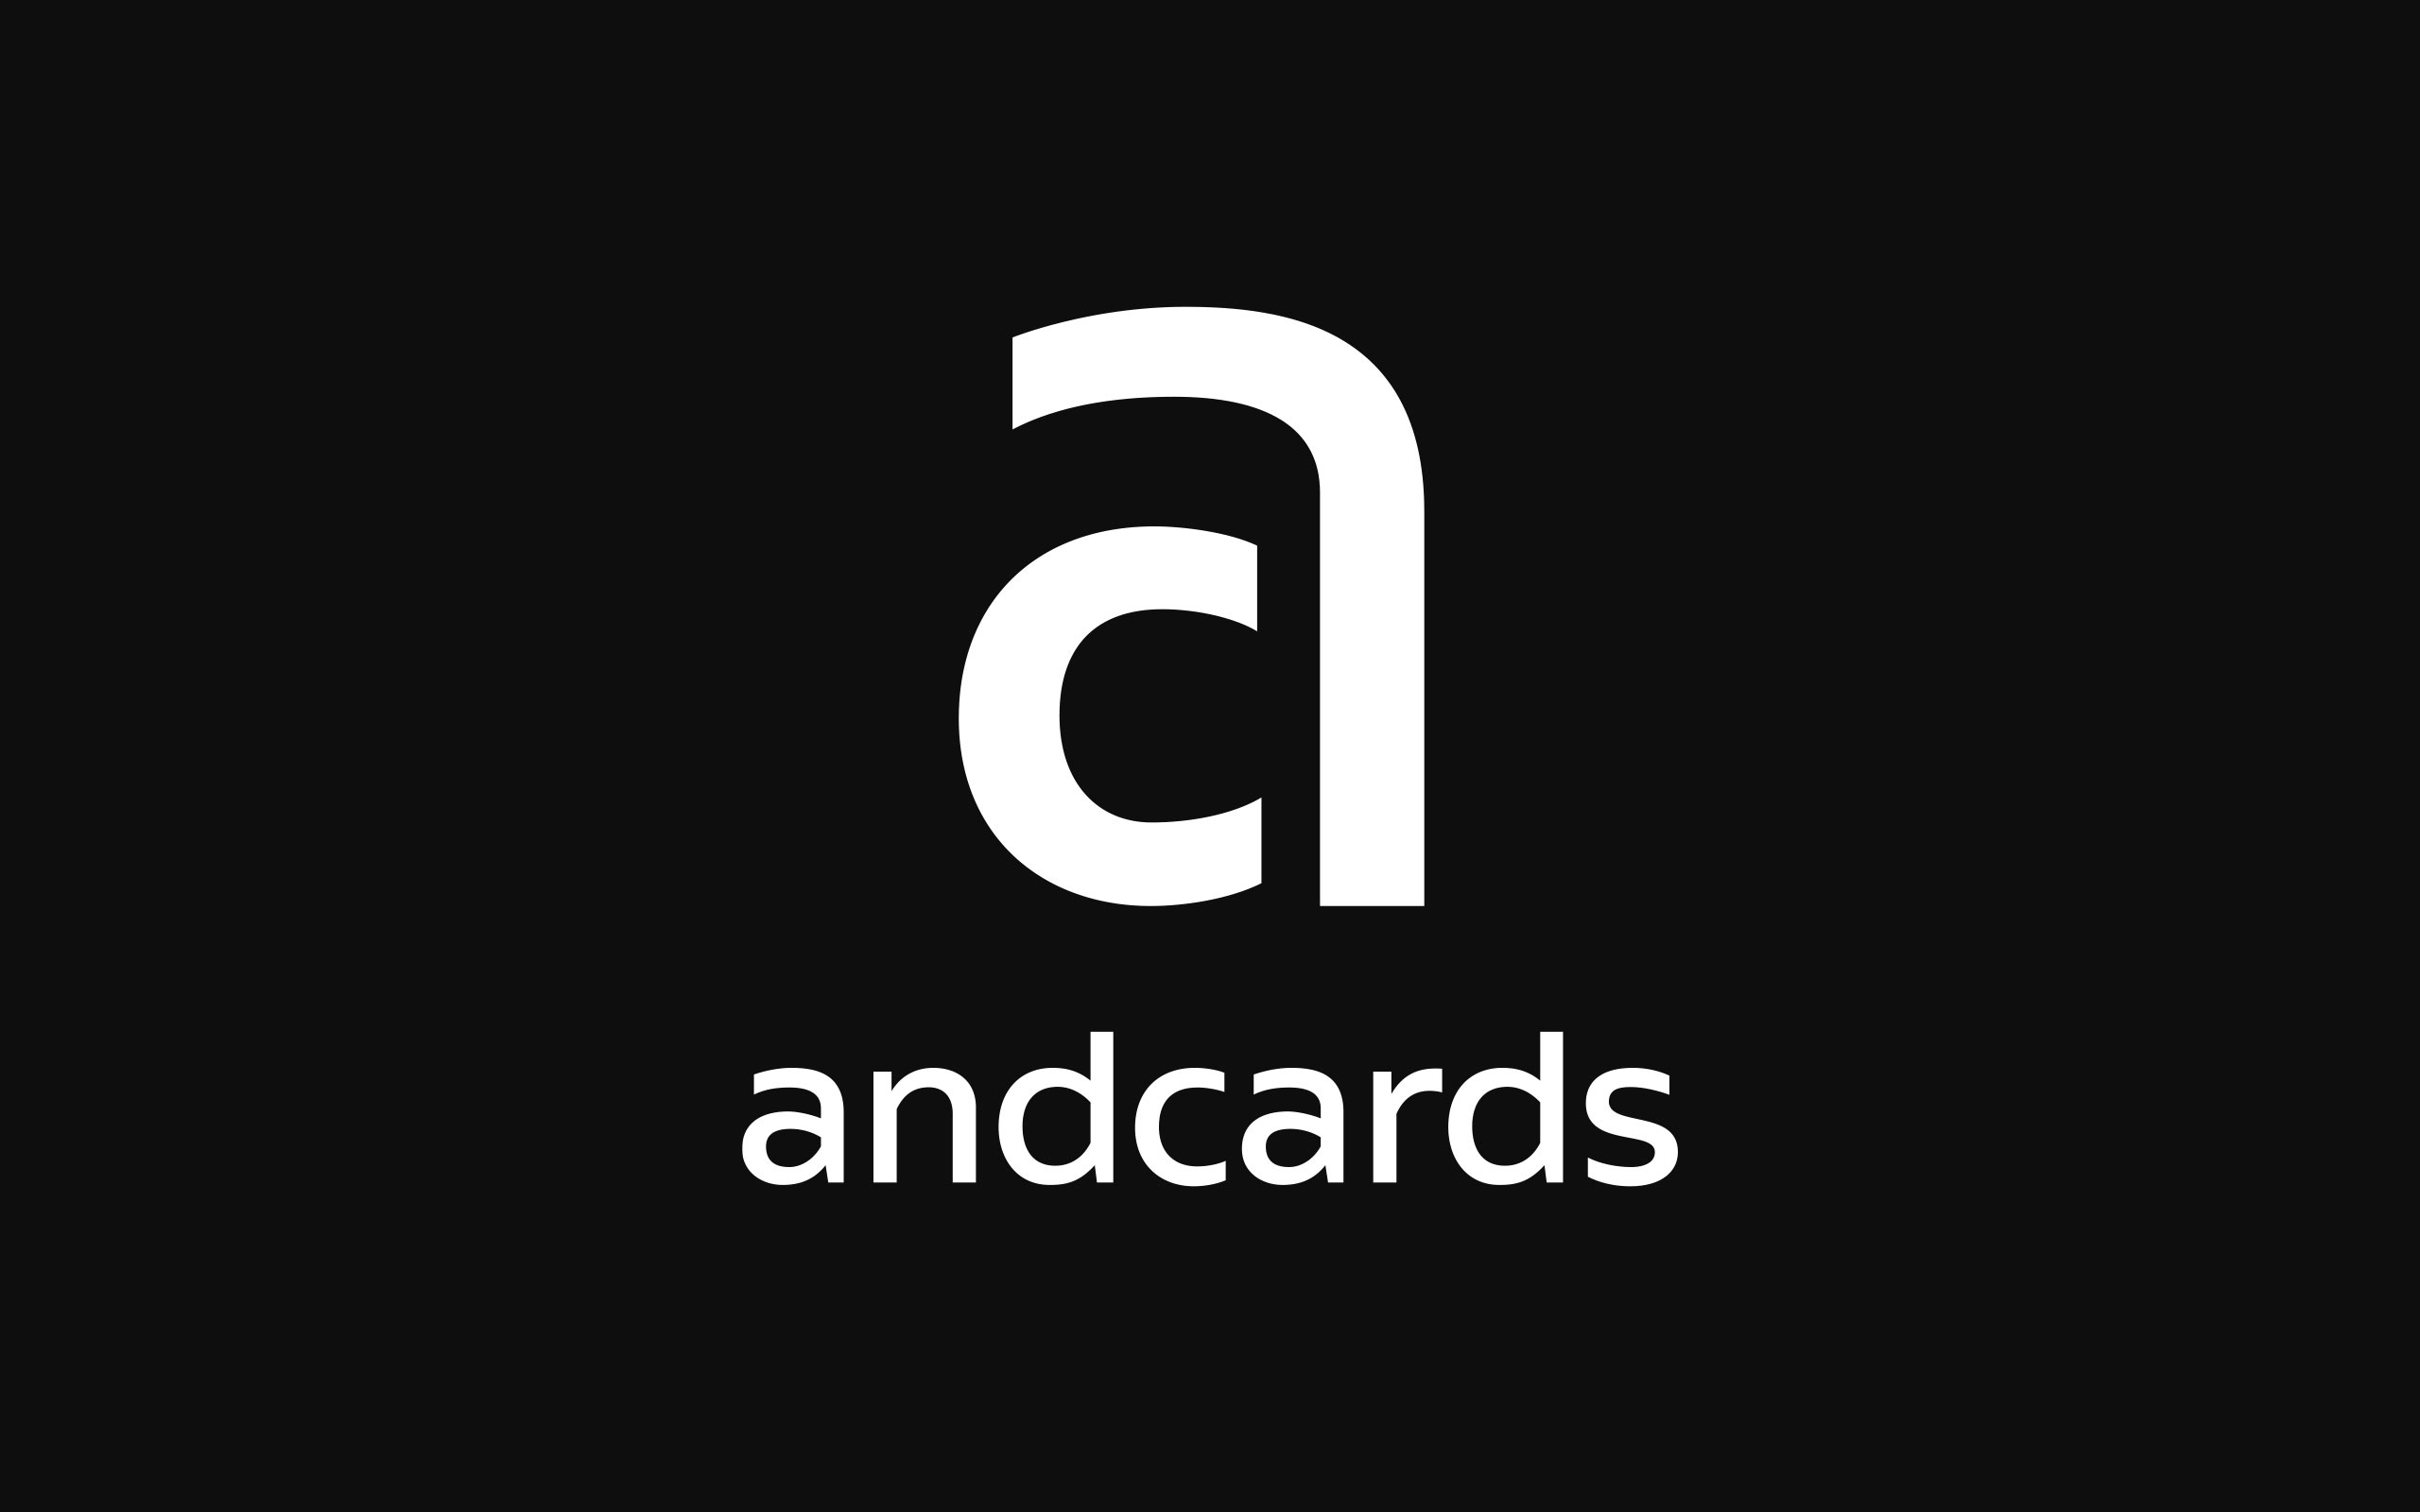 andcards logo